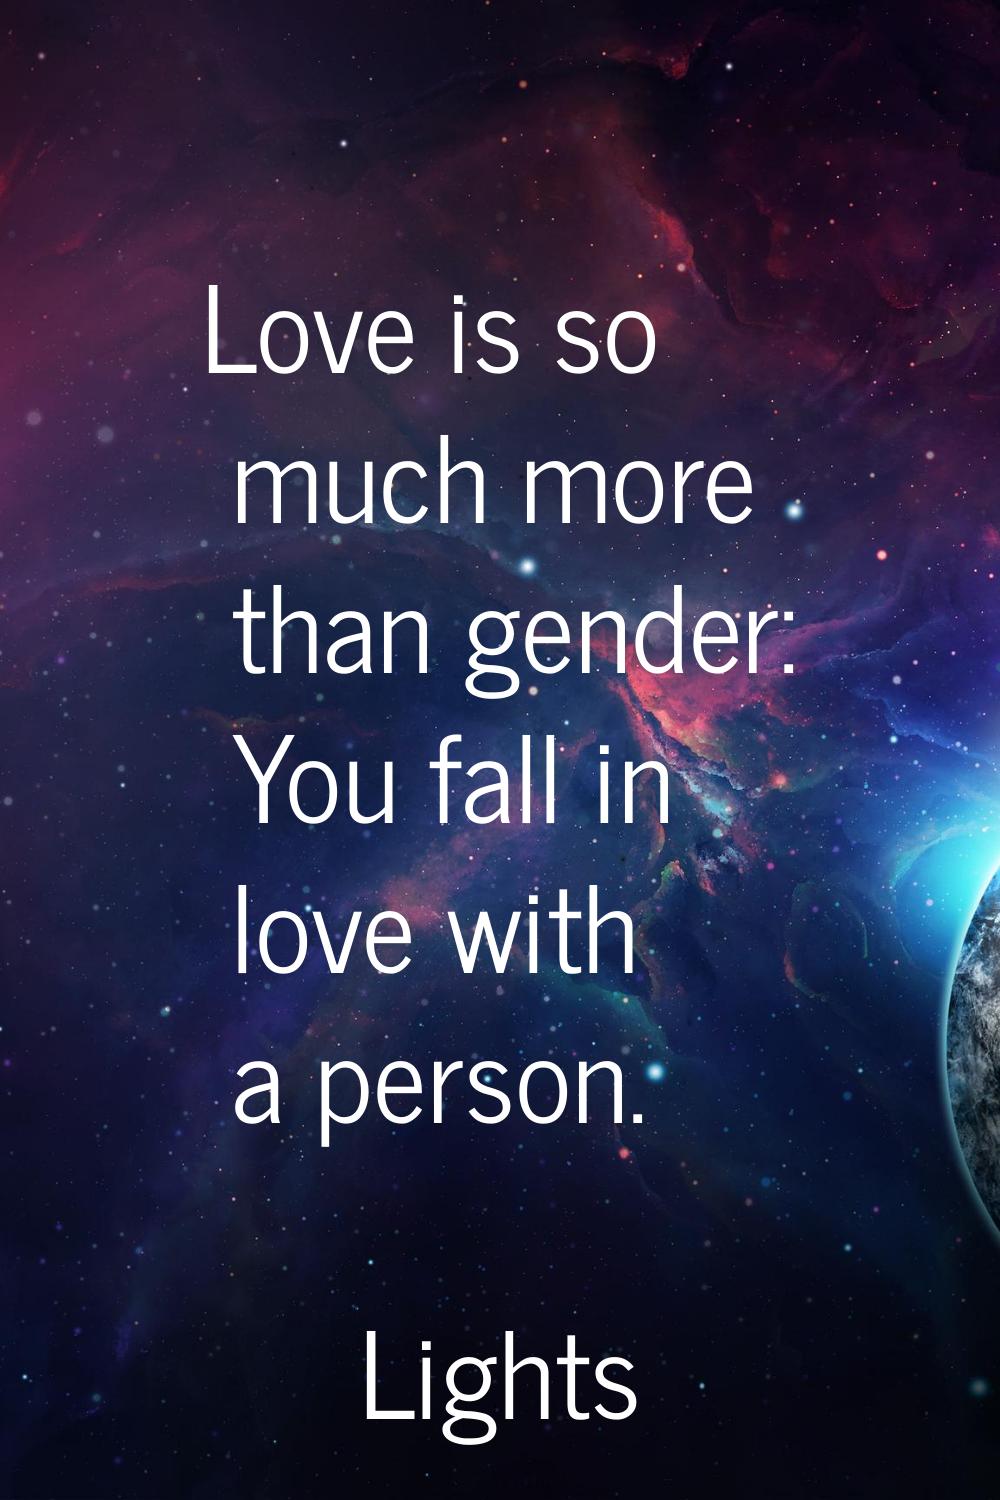 Love is so much more than gender: You fall in love with a person.